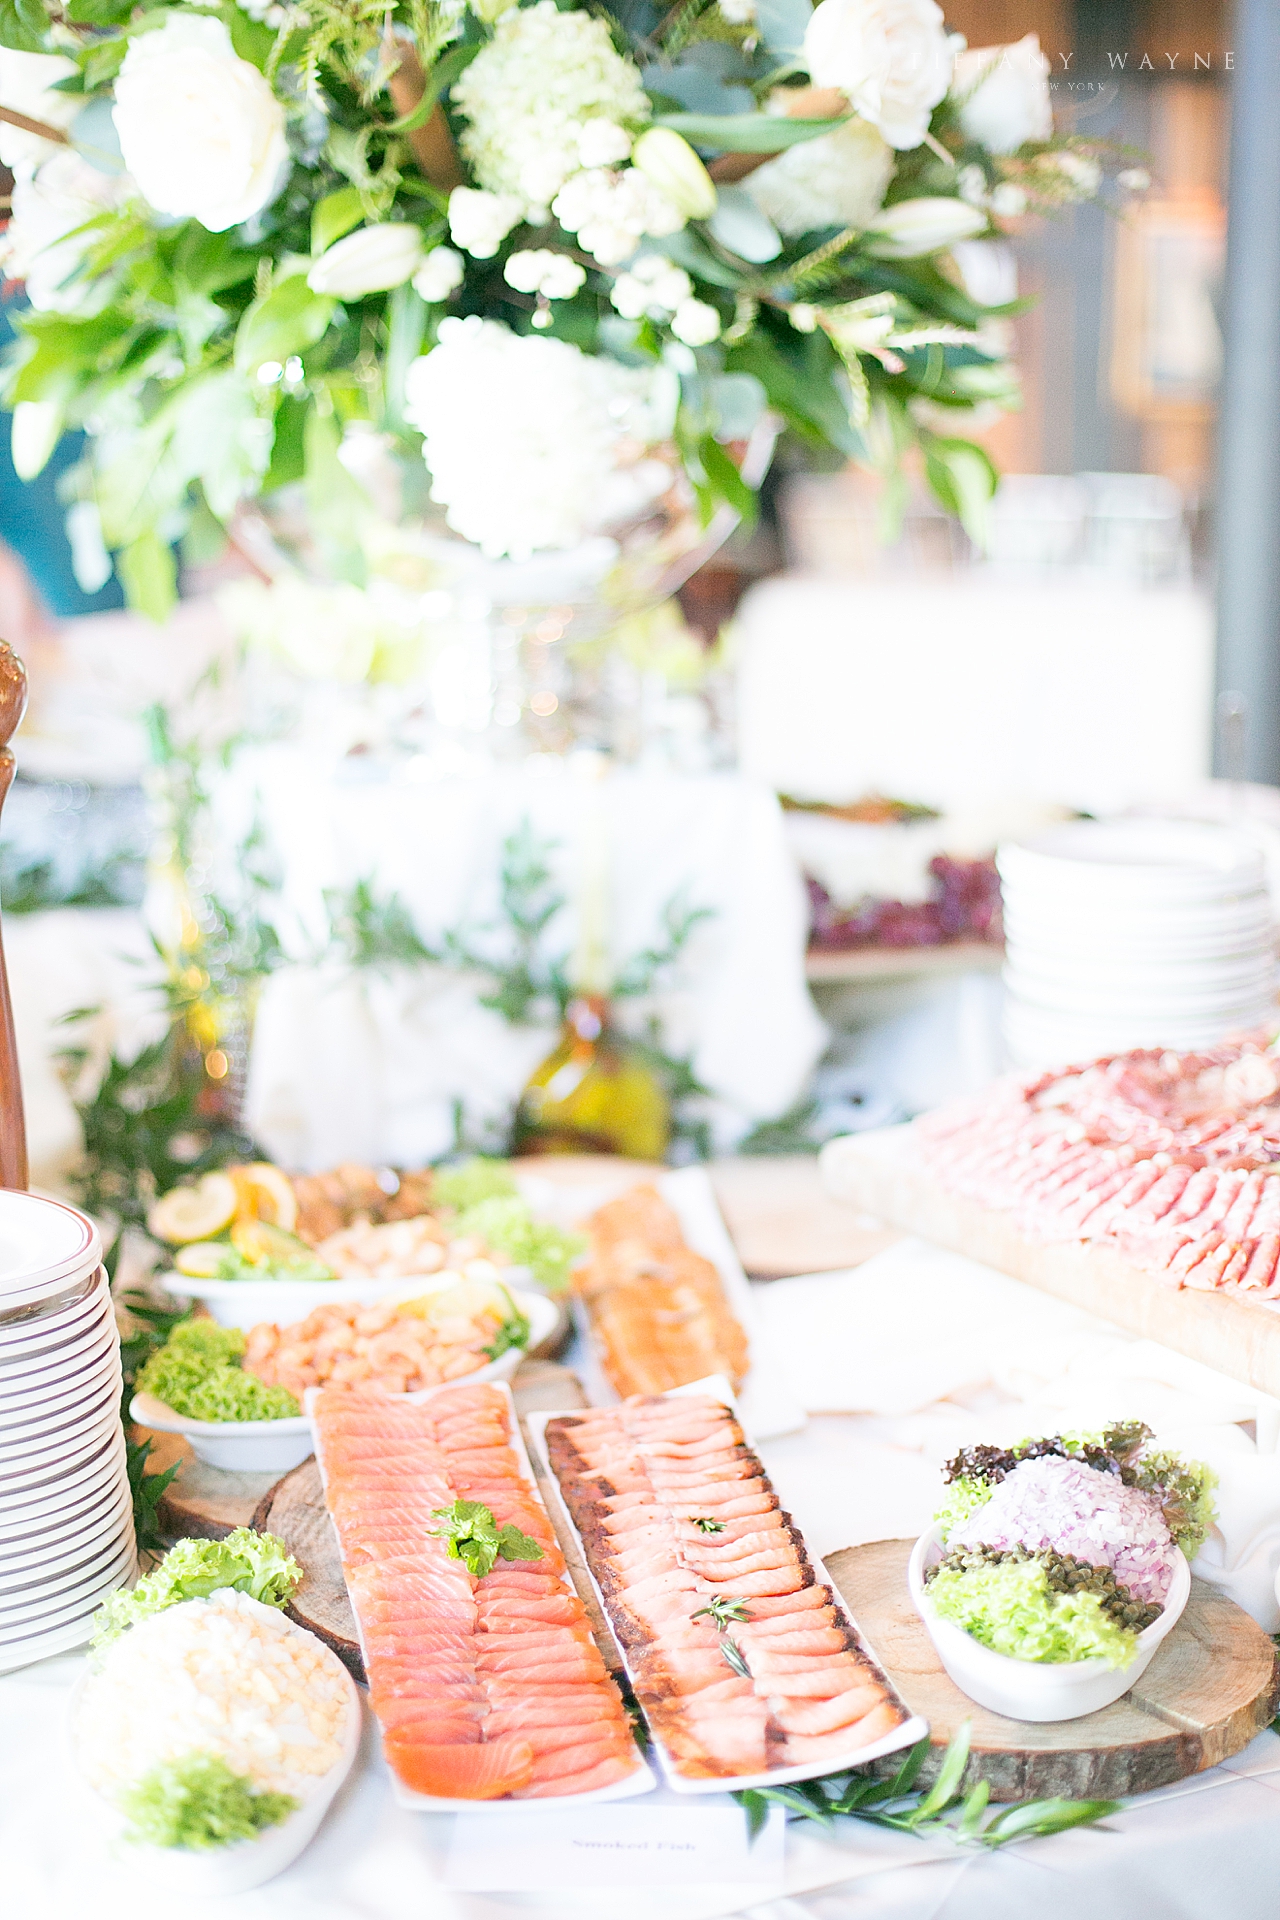 lake George Club catering photographed by wedding photographer Tiffany Wayne